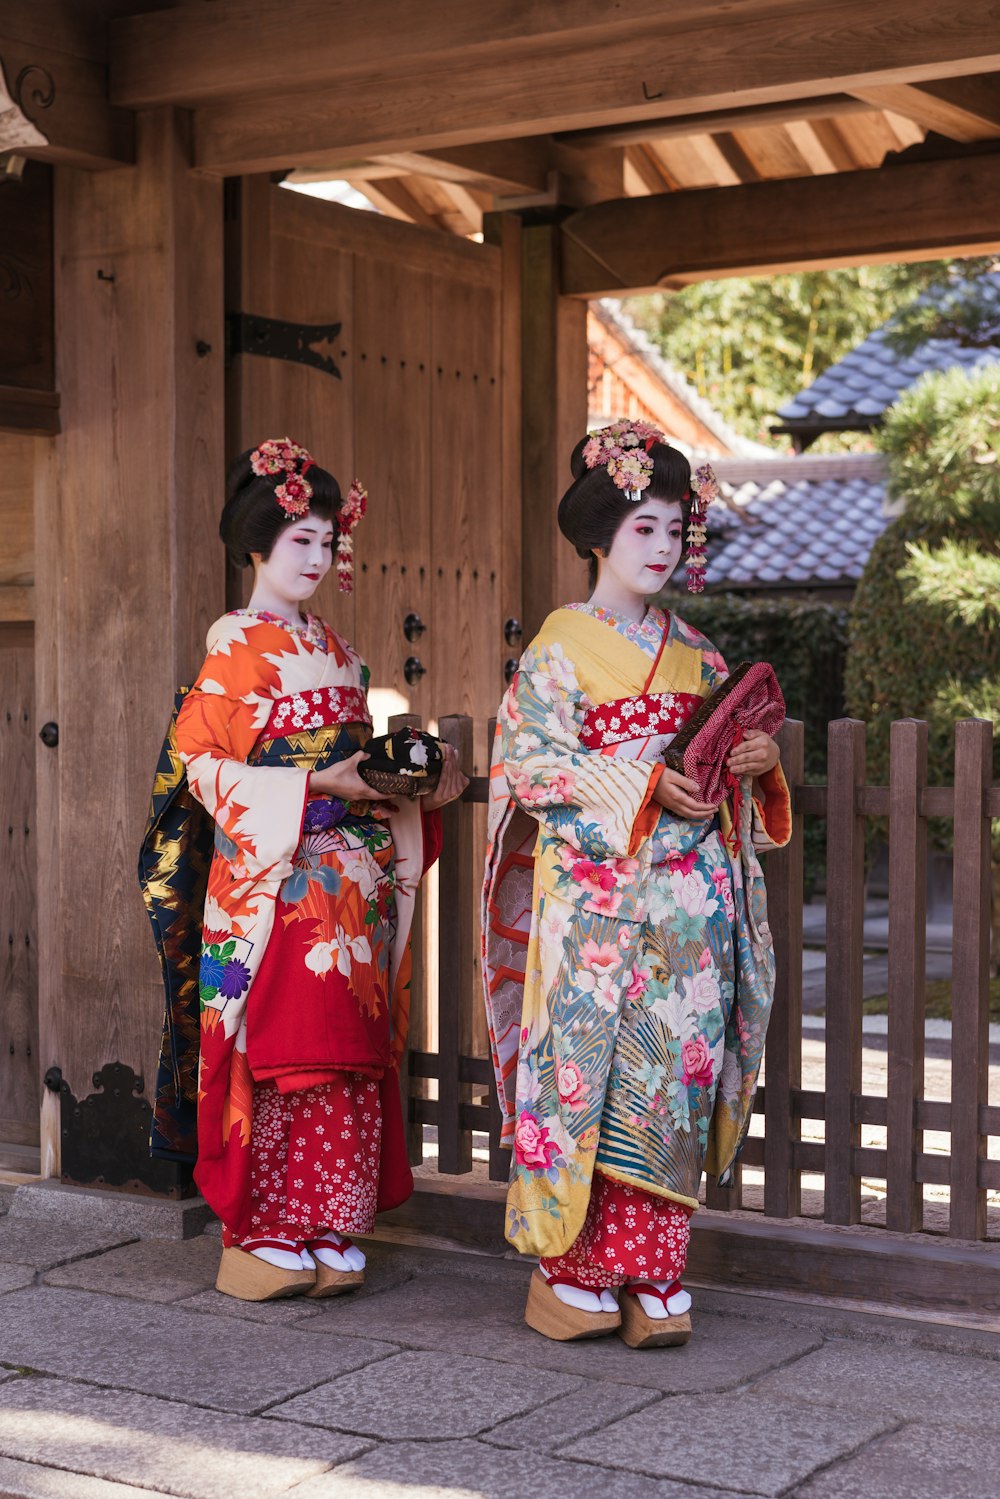 Geisha Pictures | Download Free Images on Unsplash